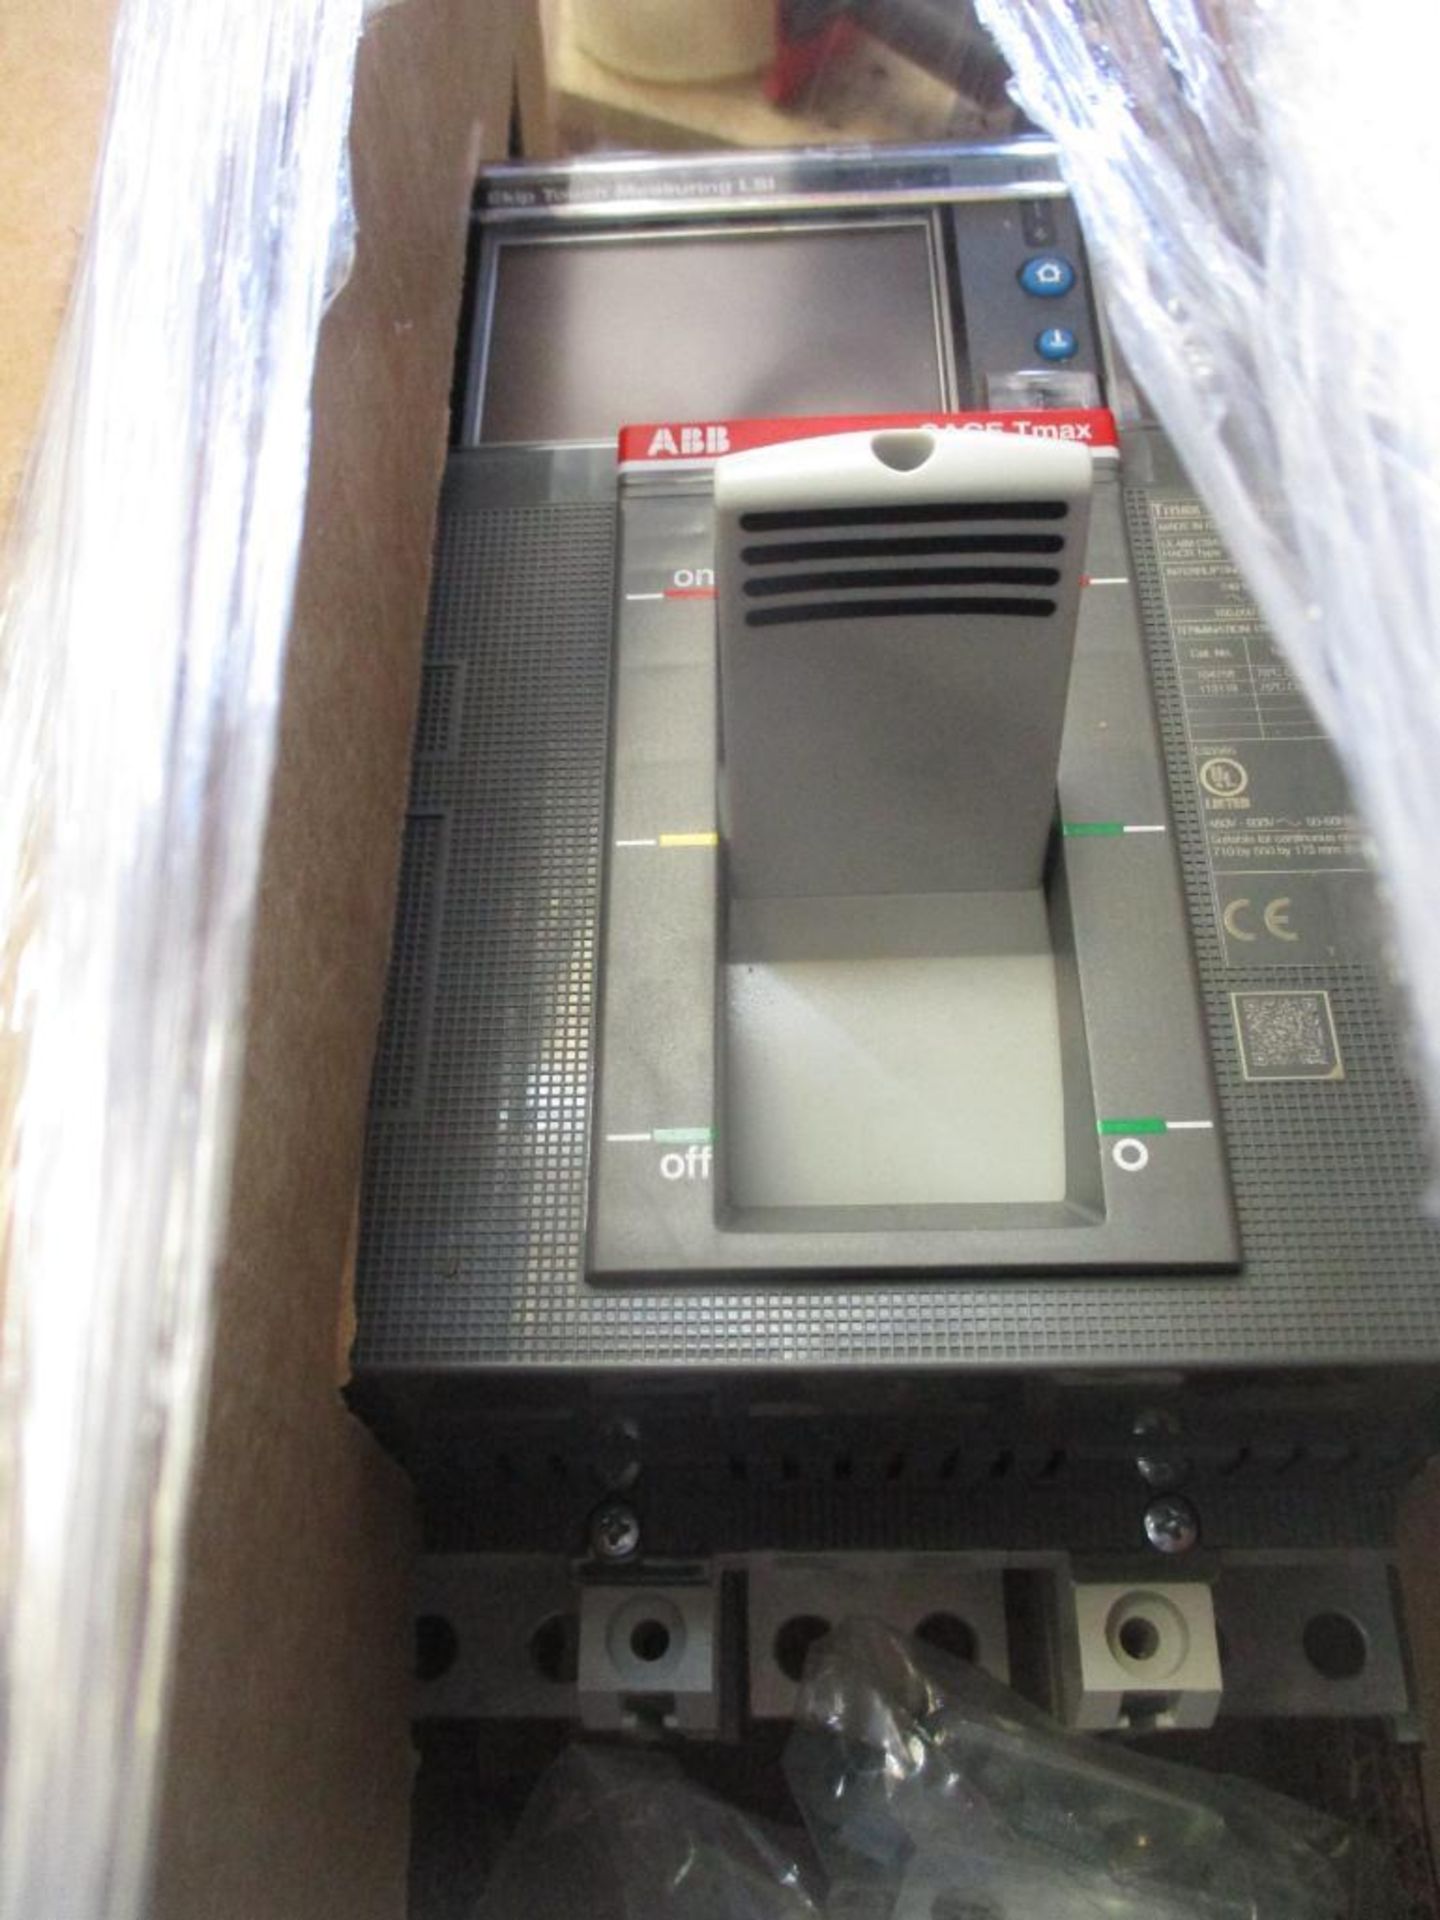 ABB 800 AMP Circuit Breaker, SACE TMAX XT7 H 800, EKIP Touch Measuring LSI 3-Pole (New in Box) - Image 2 of 4